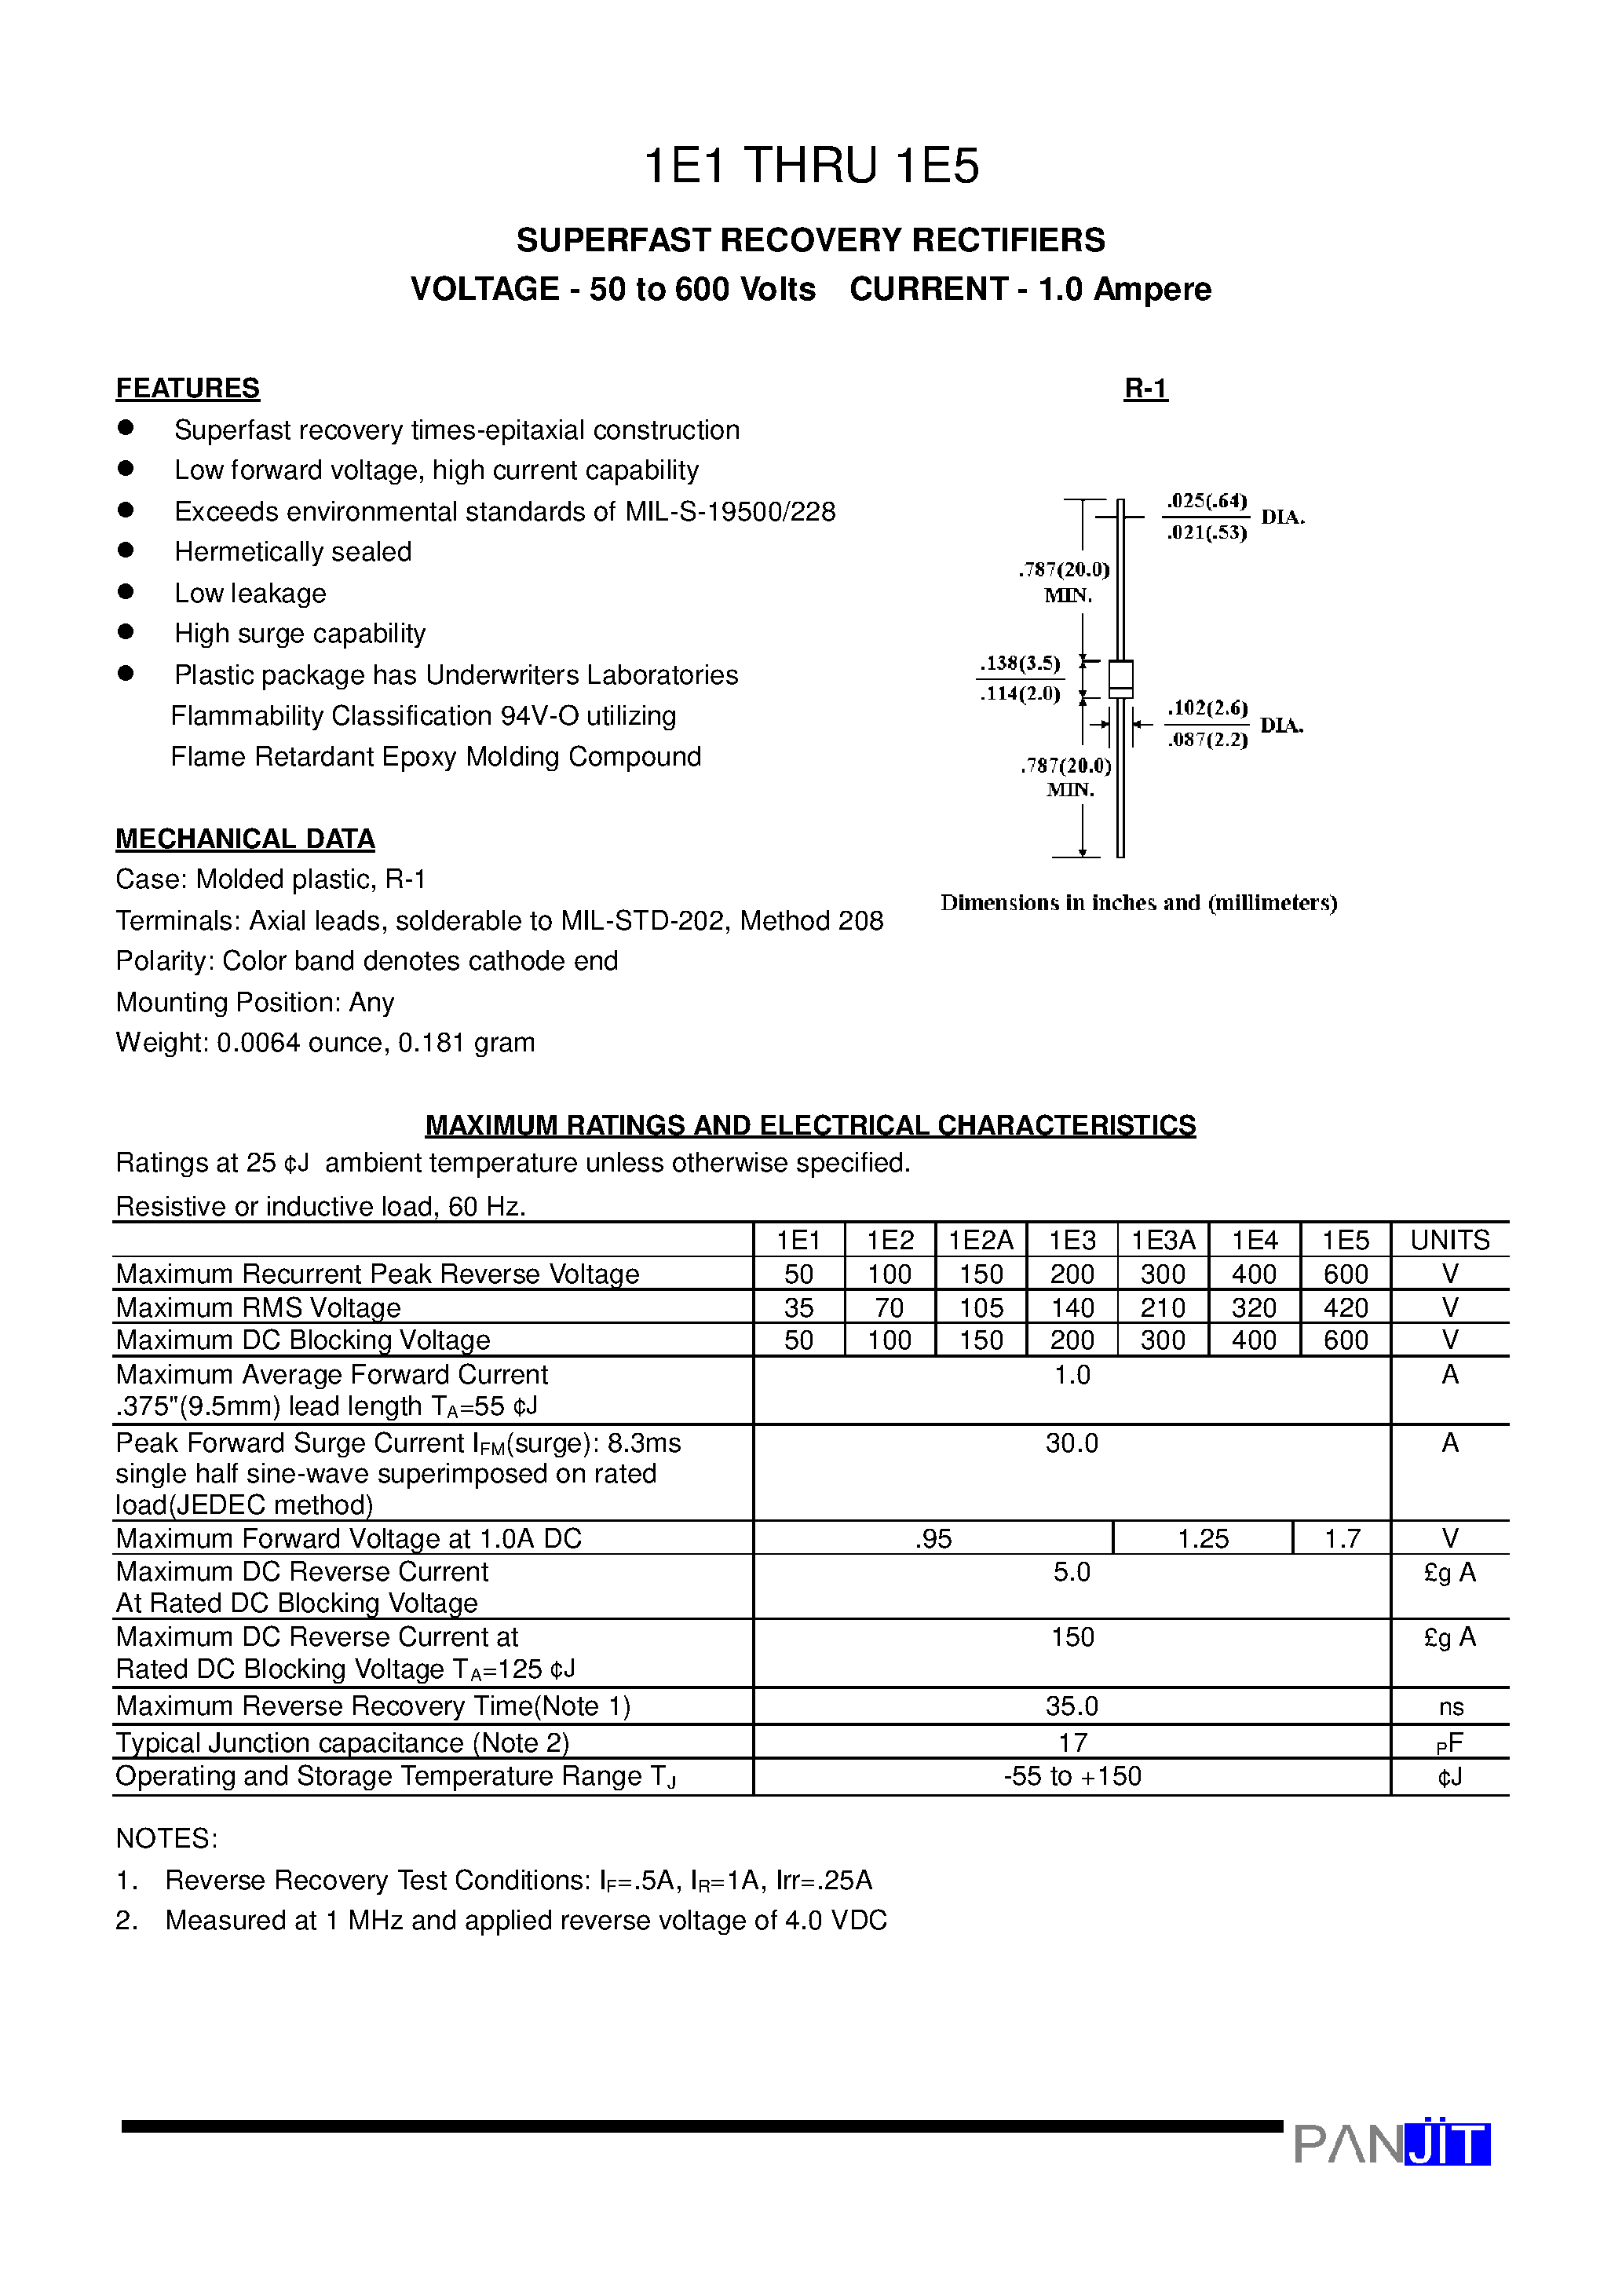 Datasheet 1.00E+05 - SUPERFAST RECOVERY RECTIFIERS(VOLTAGE - 50 to 600 Volts CURRENT - 1.0 Ampere) page 1